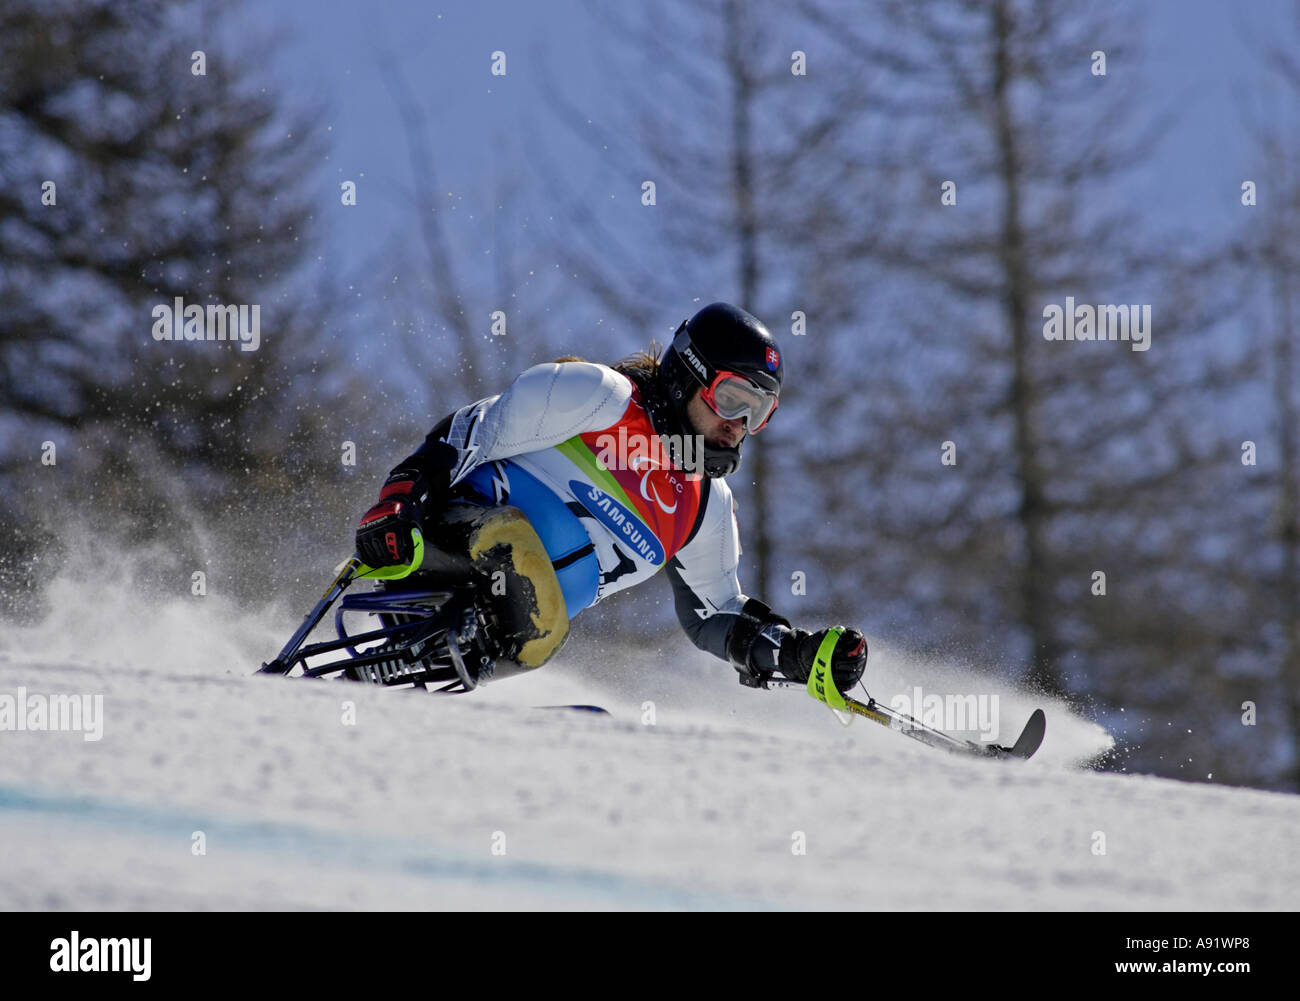 Peter Sutor LW12-1 of Slovakia in the Mens Alpine Skiing Super G Sitting competition Stock Photo